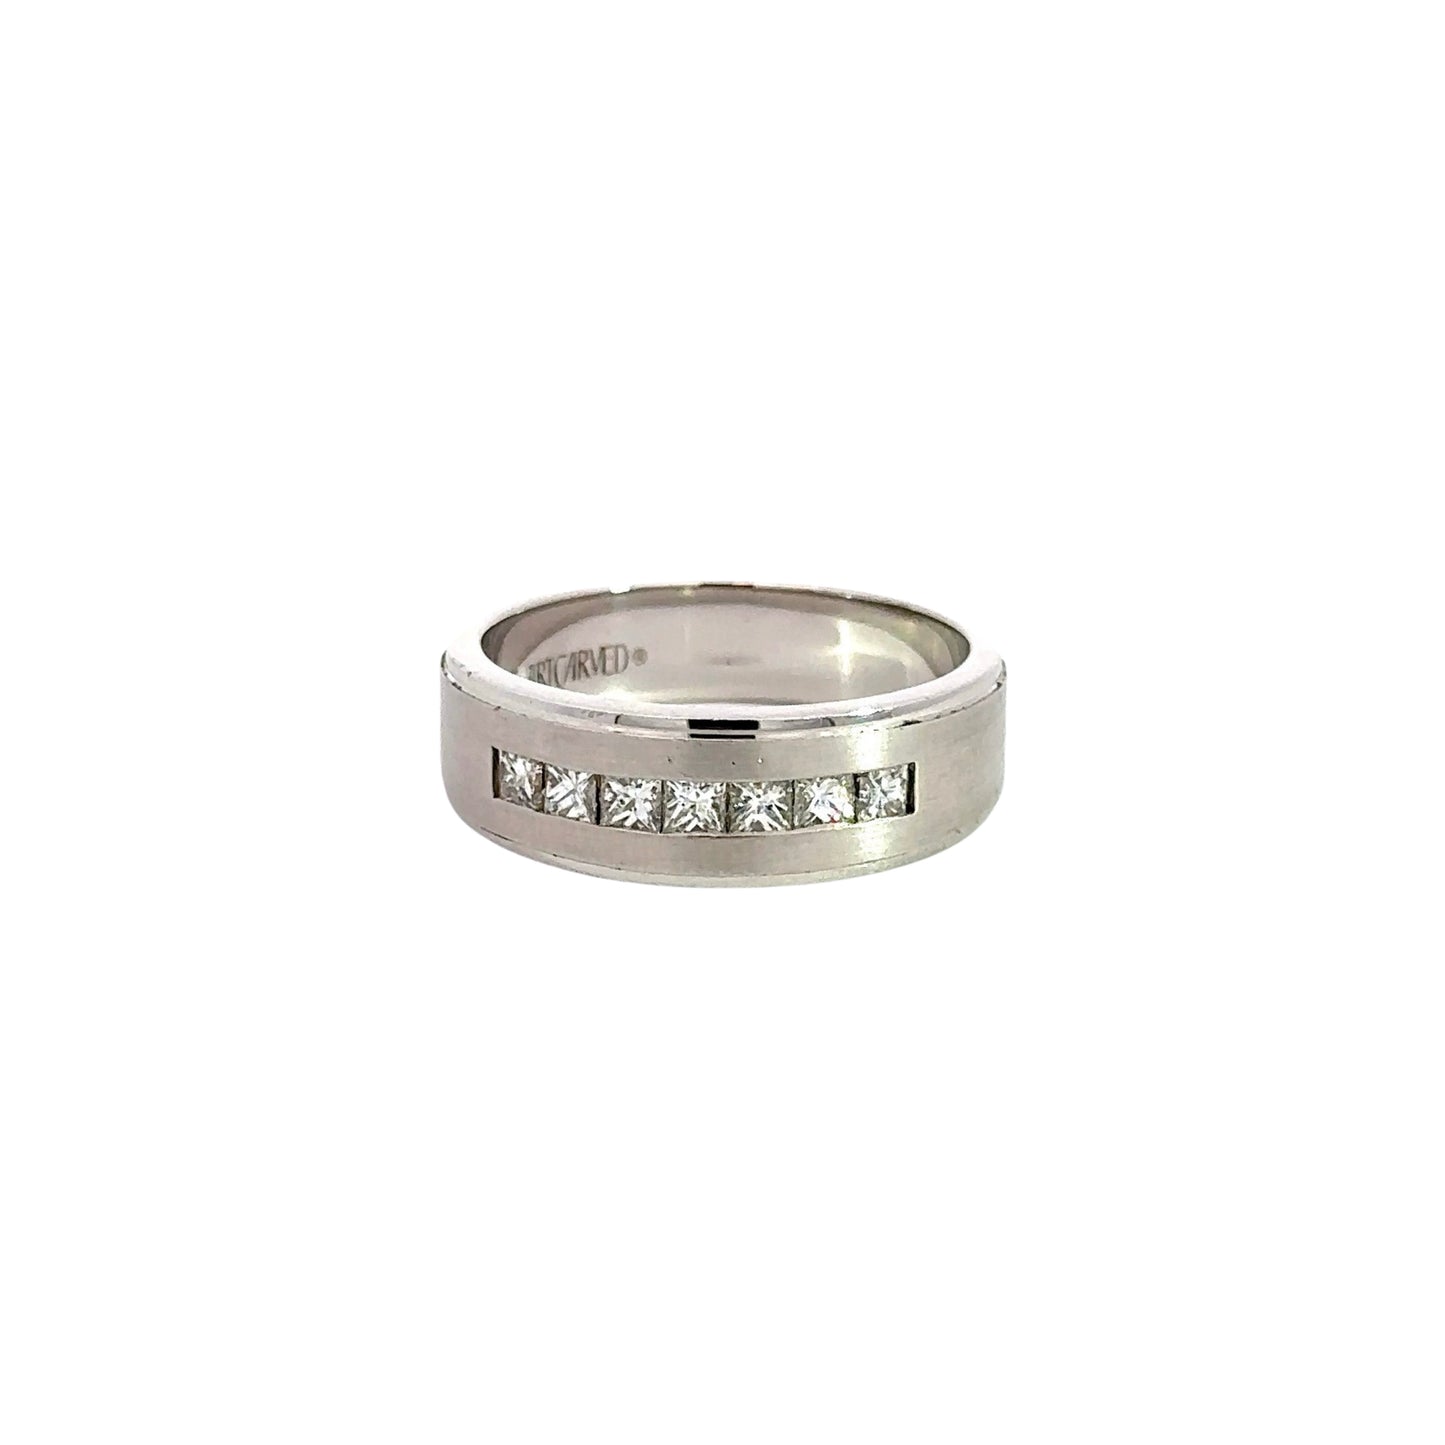 White gold band ring with 7 princess cut diamonds on front of the band. Scratches on gold